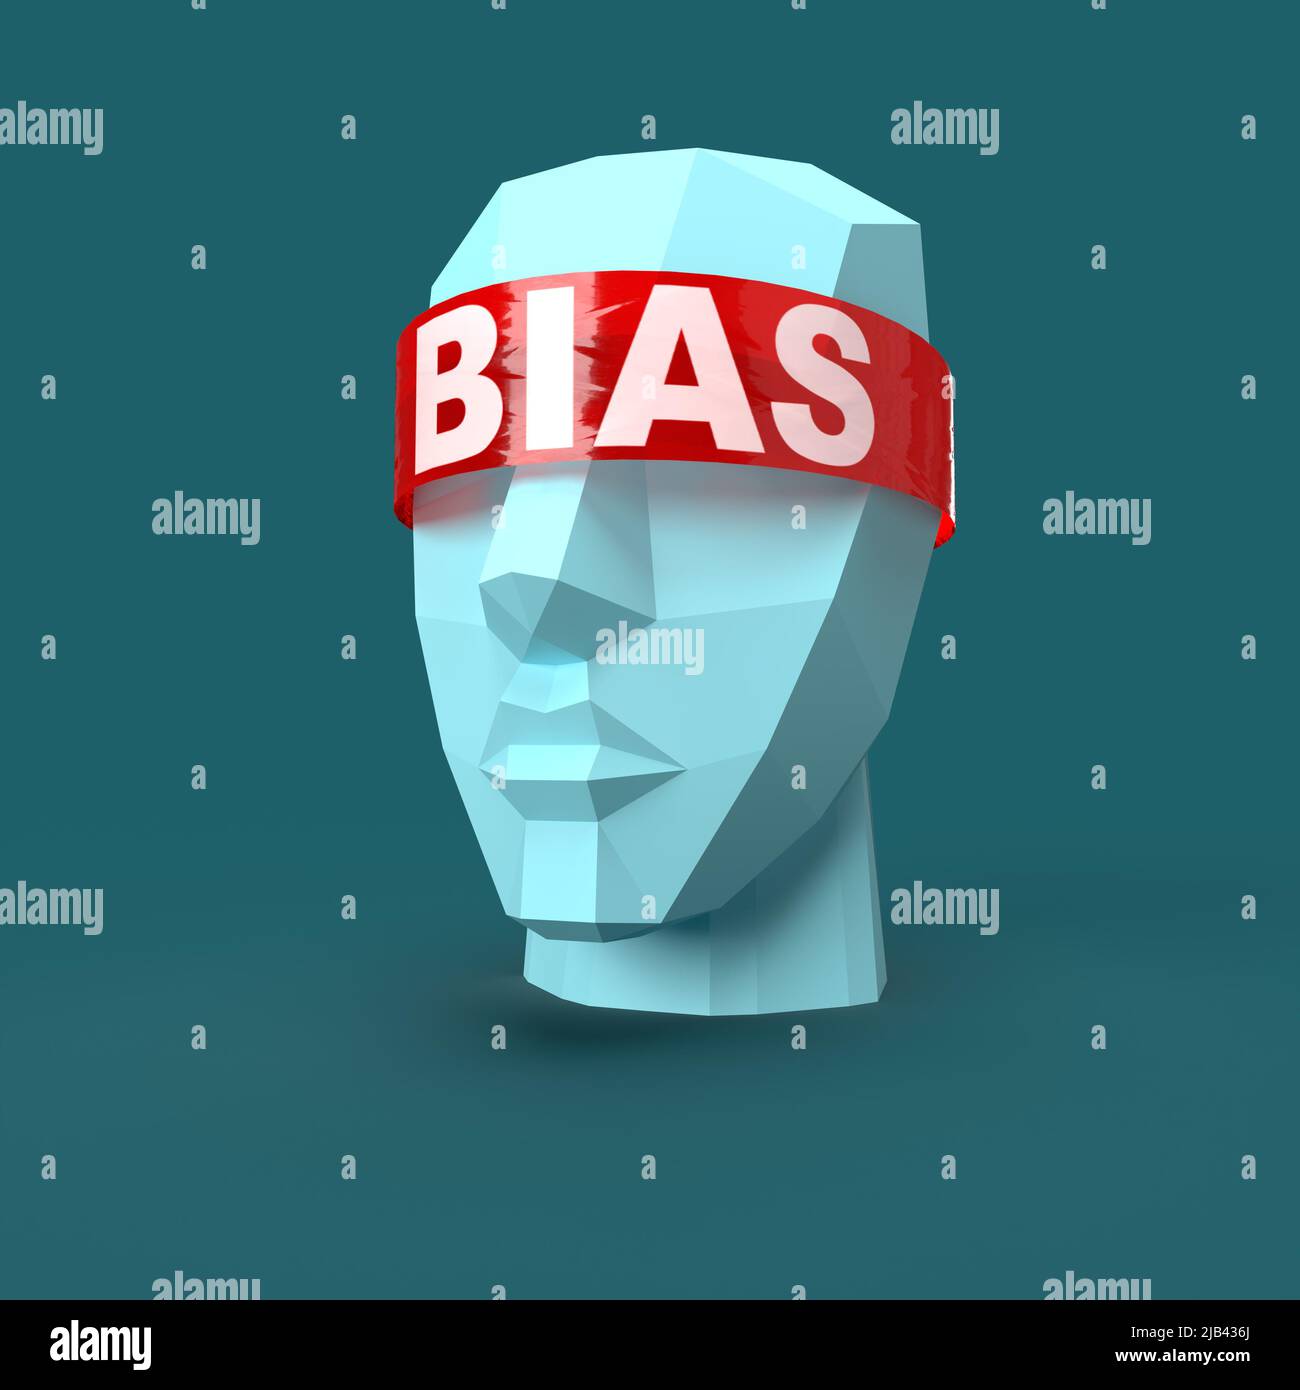 personal dismissal of facts that don't fit their narrow worldview - Bias 3d illustration Stock Photo